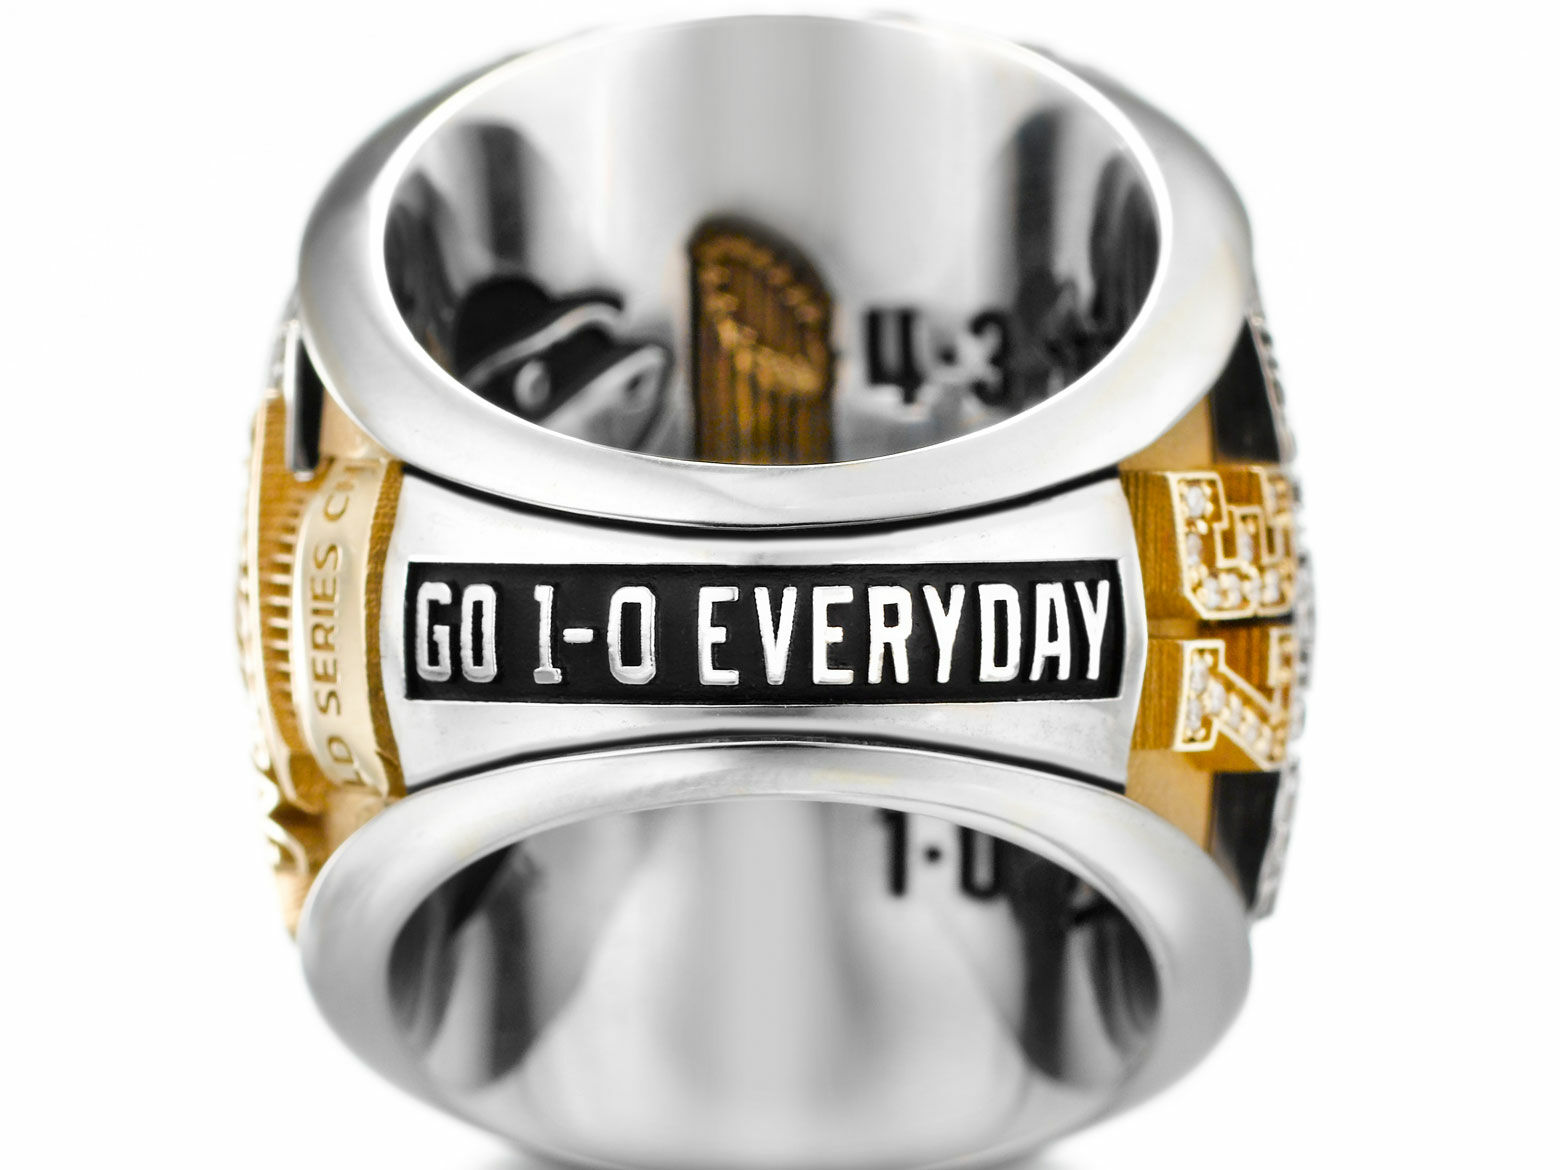 Nats unveil World Series championship rings in virtual